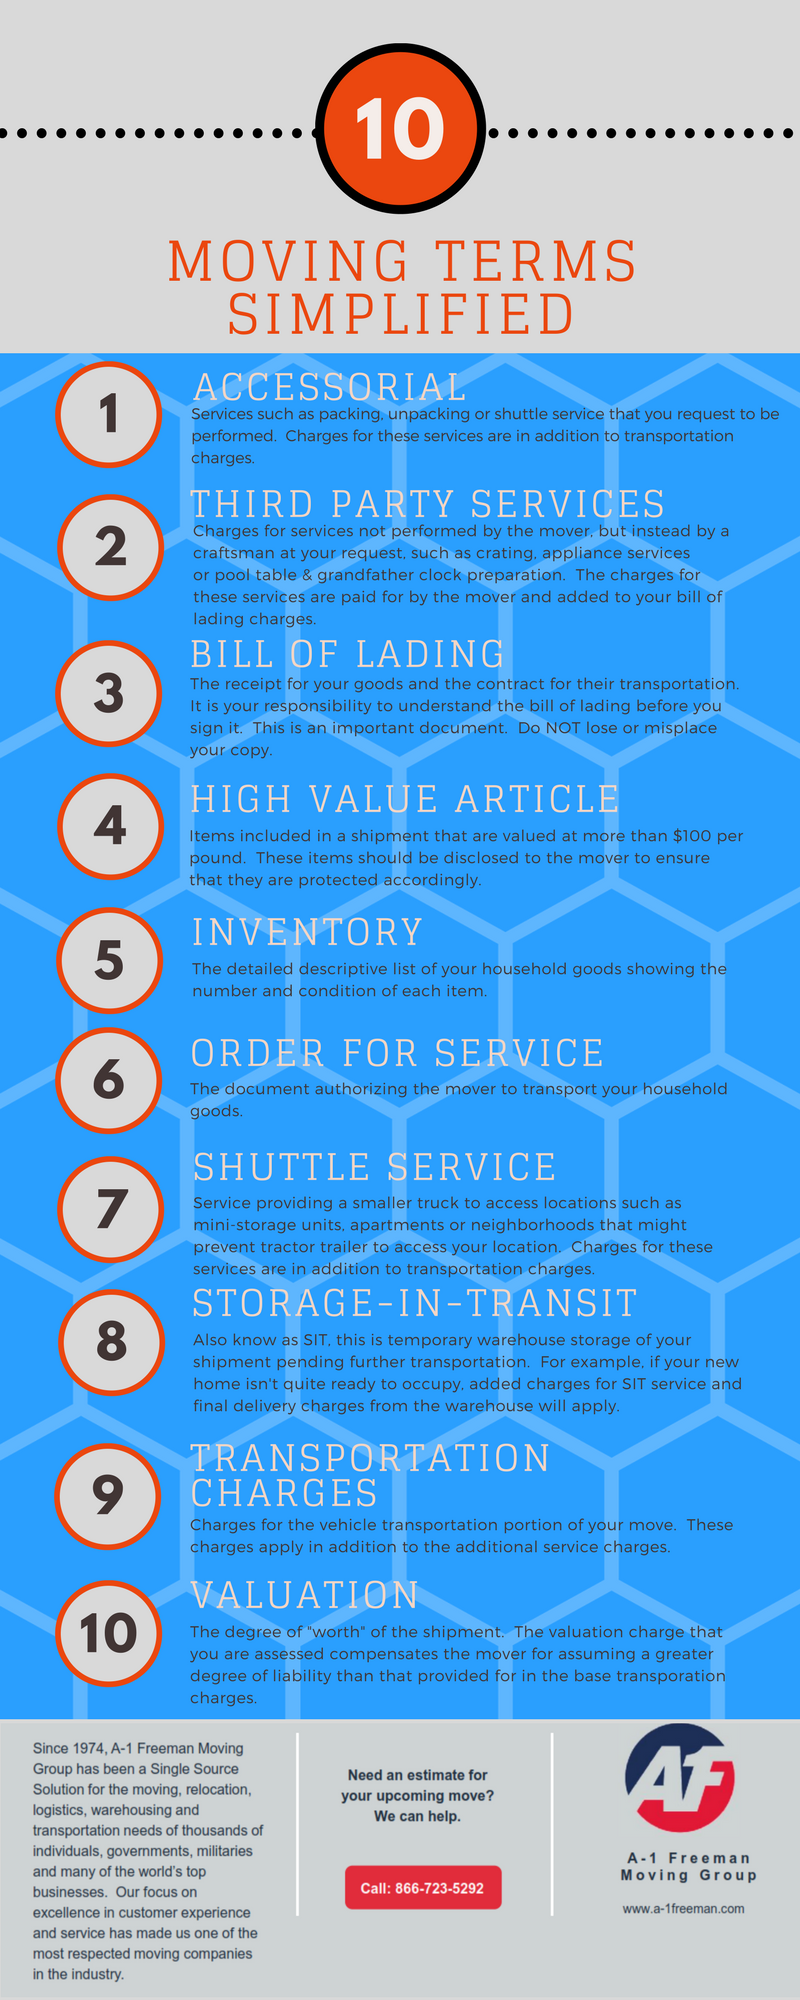 A-1 Freeman Moving Group Wichita Falls Moving Terms Infographic